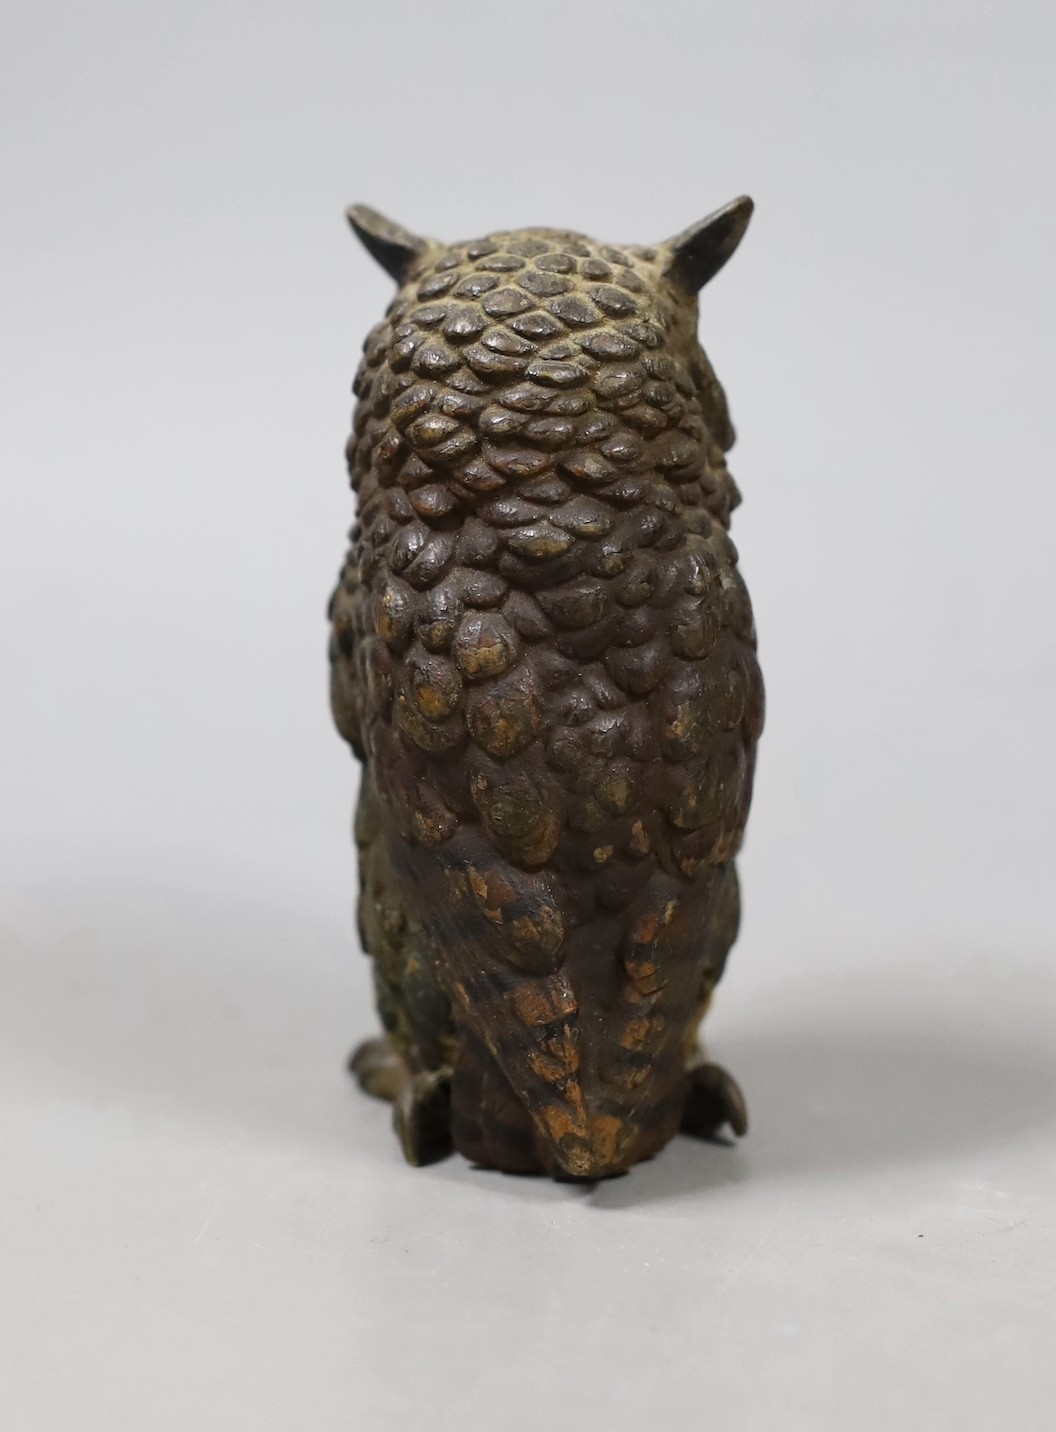 An early 20th century Austrian cold painted bronze of an owl. 9.5cm high